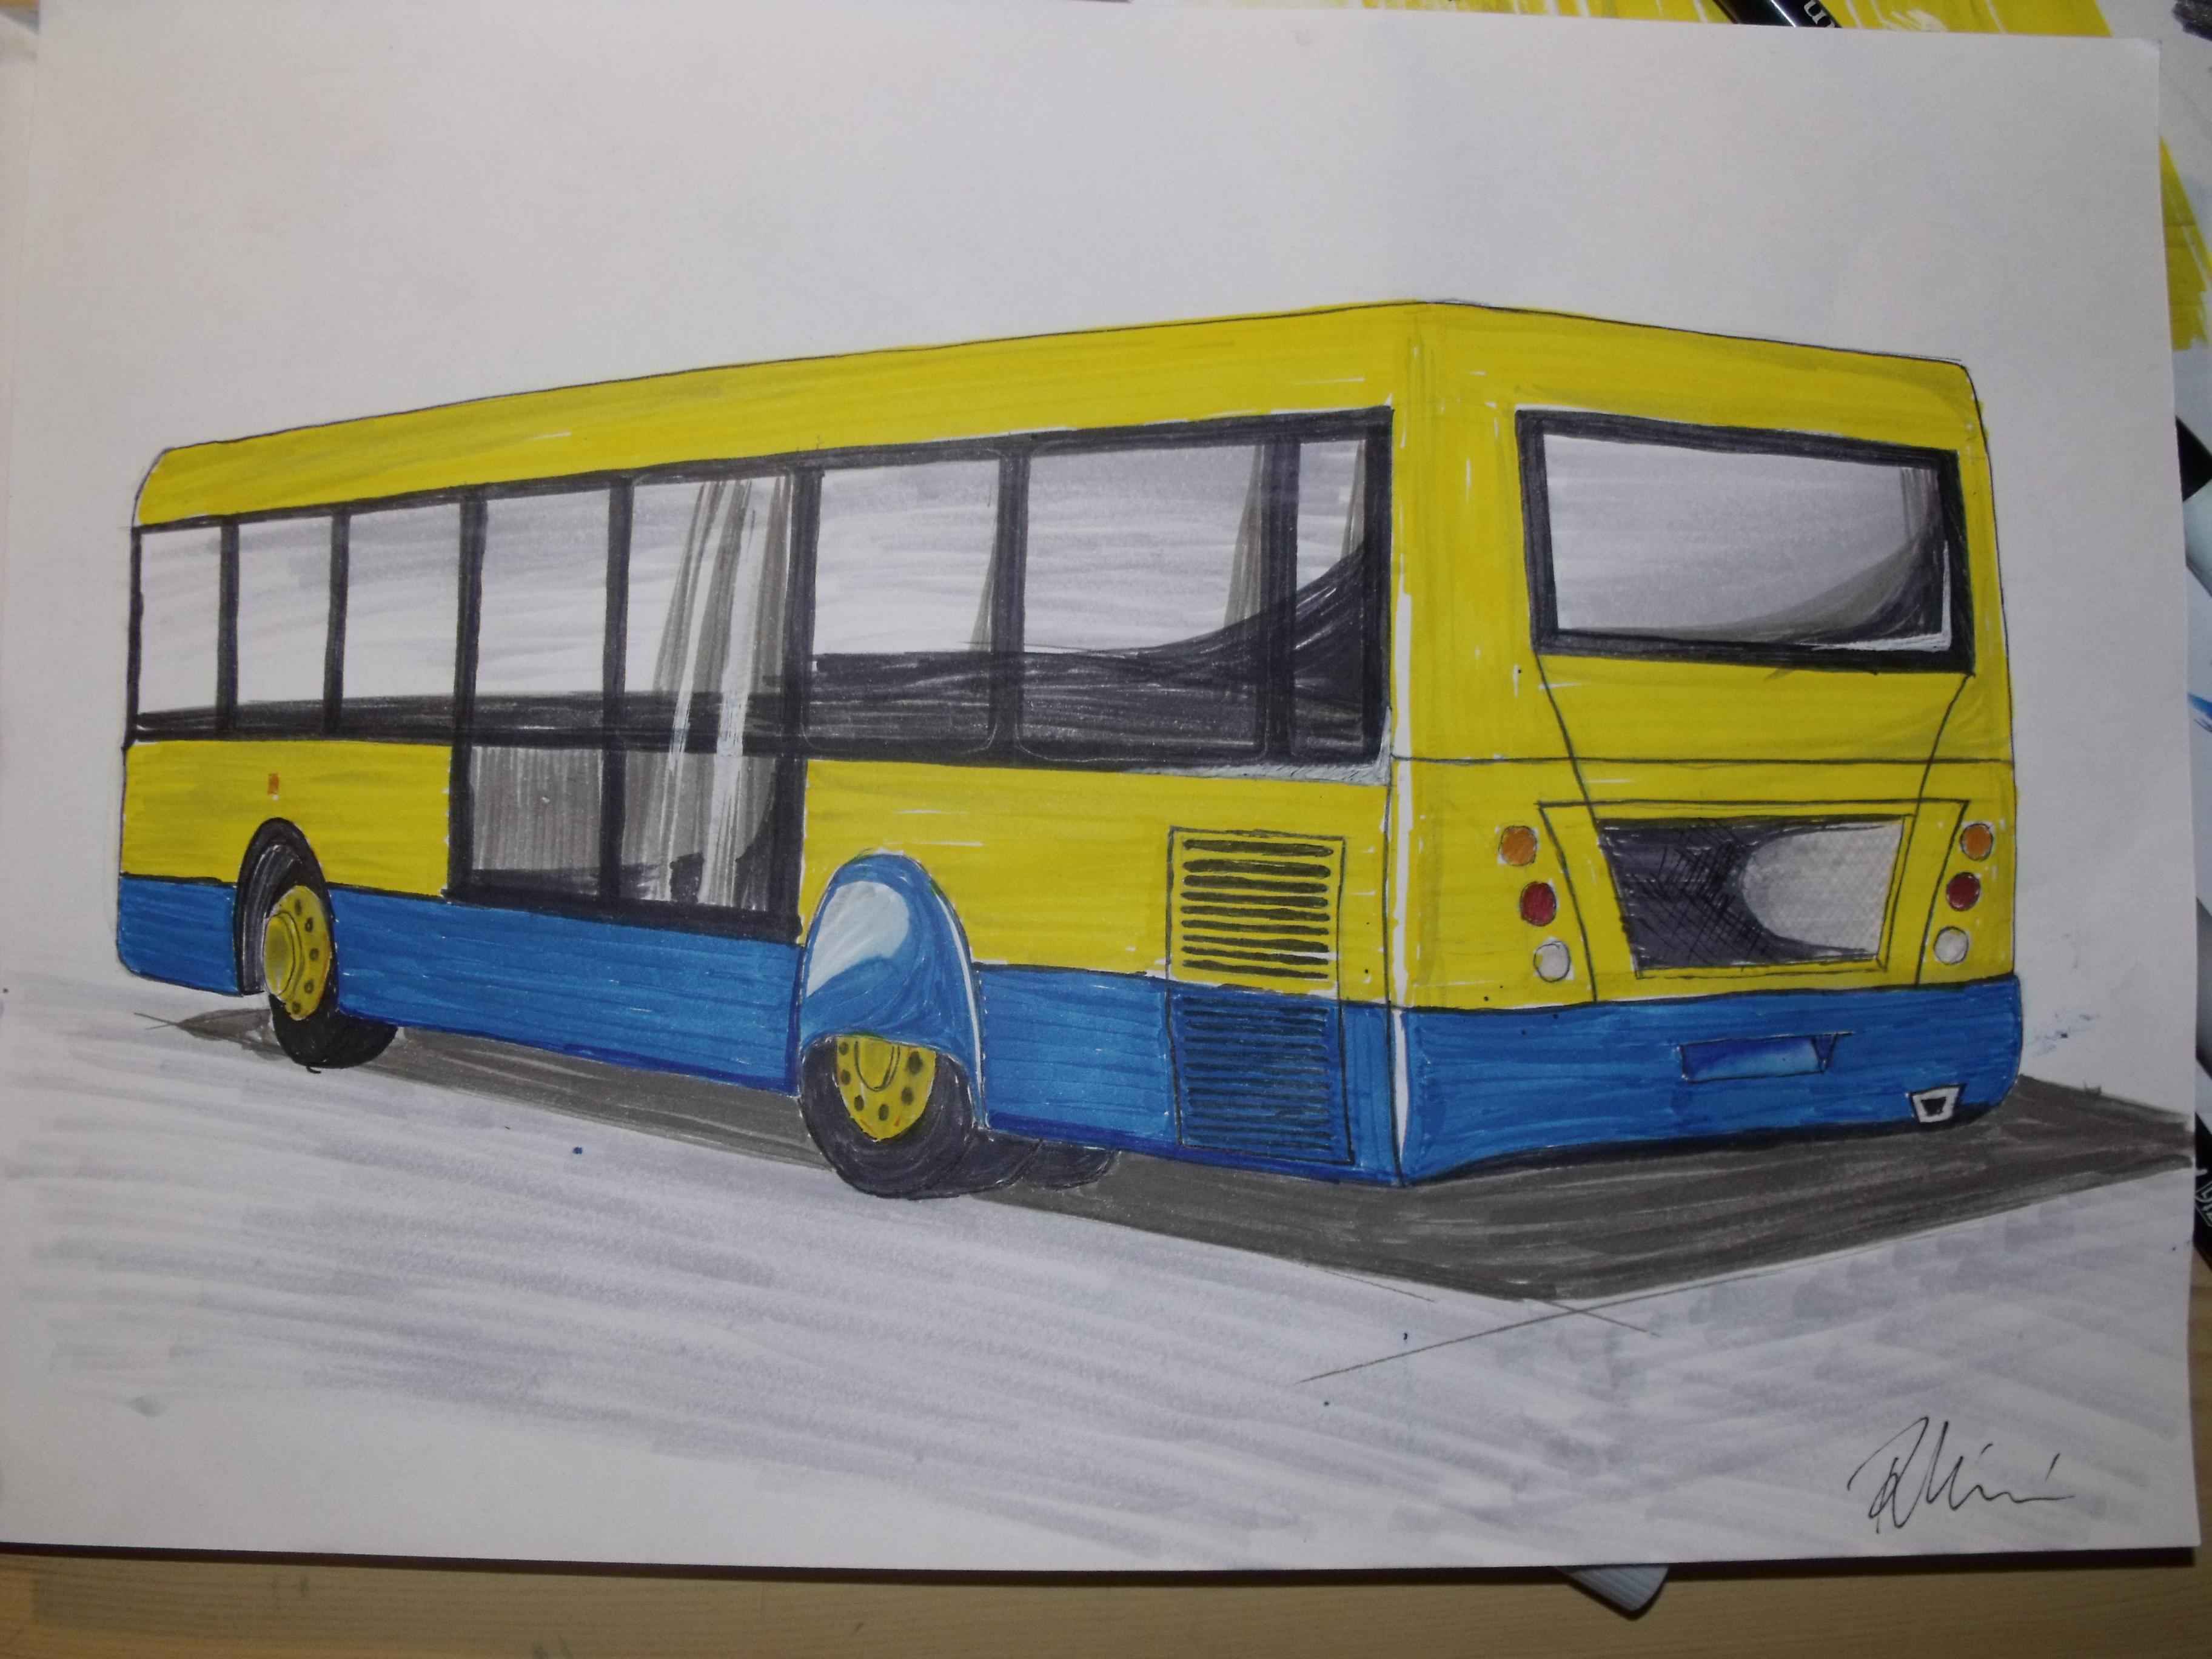 Ikarus 415 Bus Redesign Project by Mate Racz at Coroflot.